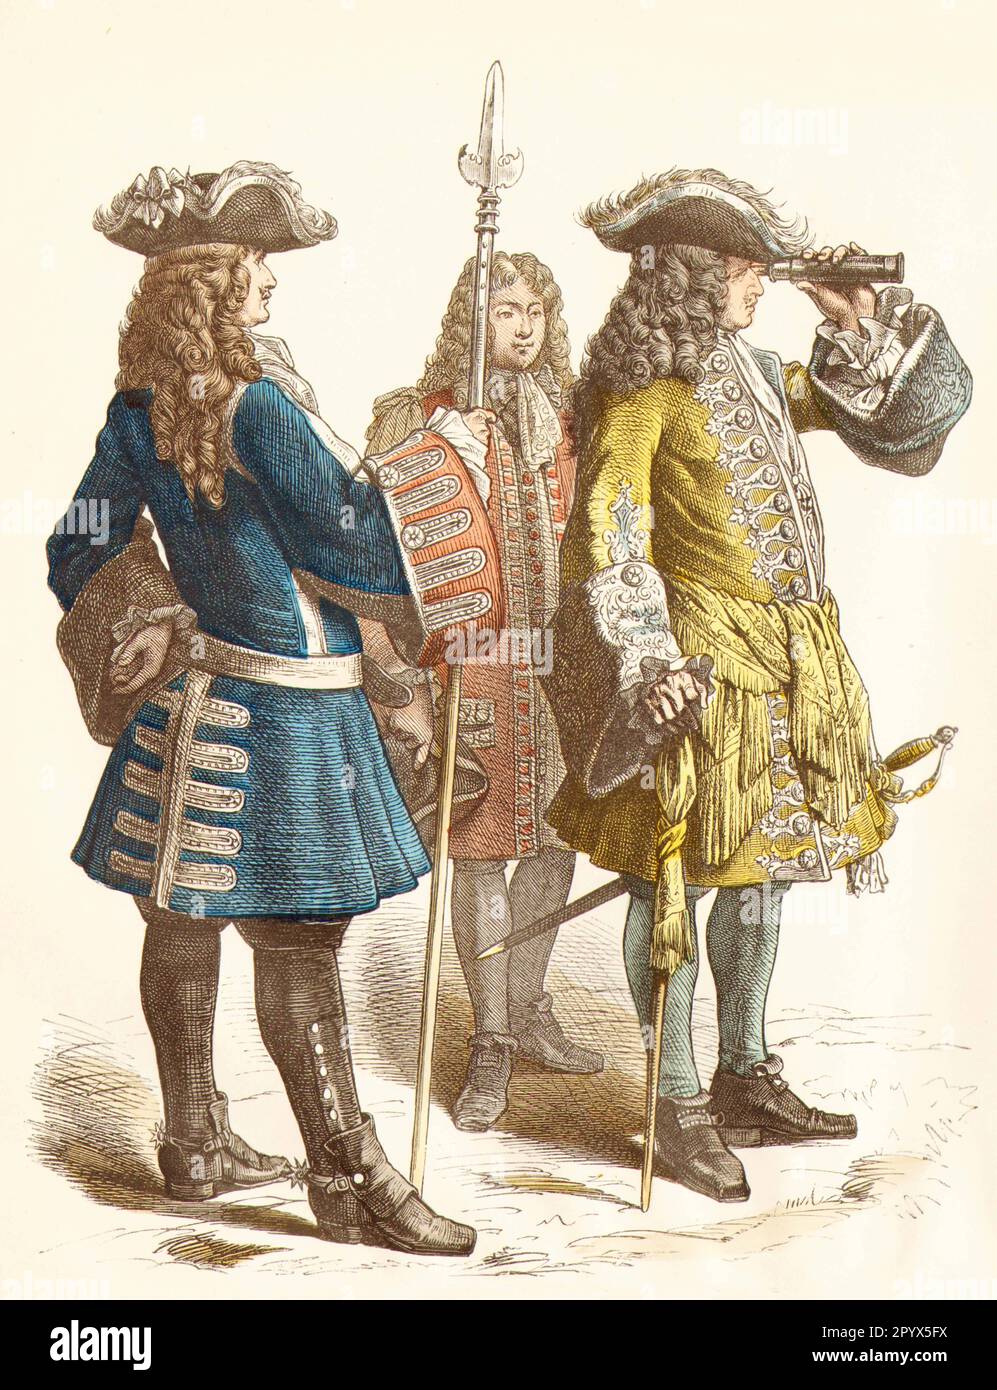 Soldiers in the 18th century in contemporary uniforms: French marshal (right) and officer with sponton, ca. 1704-1713 at the time of the War of the Spanish Succession. [automated translation] Stock Photo